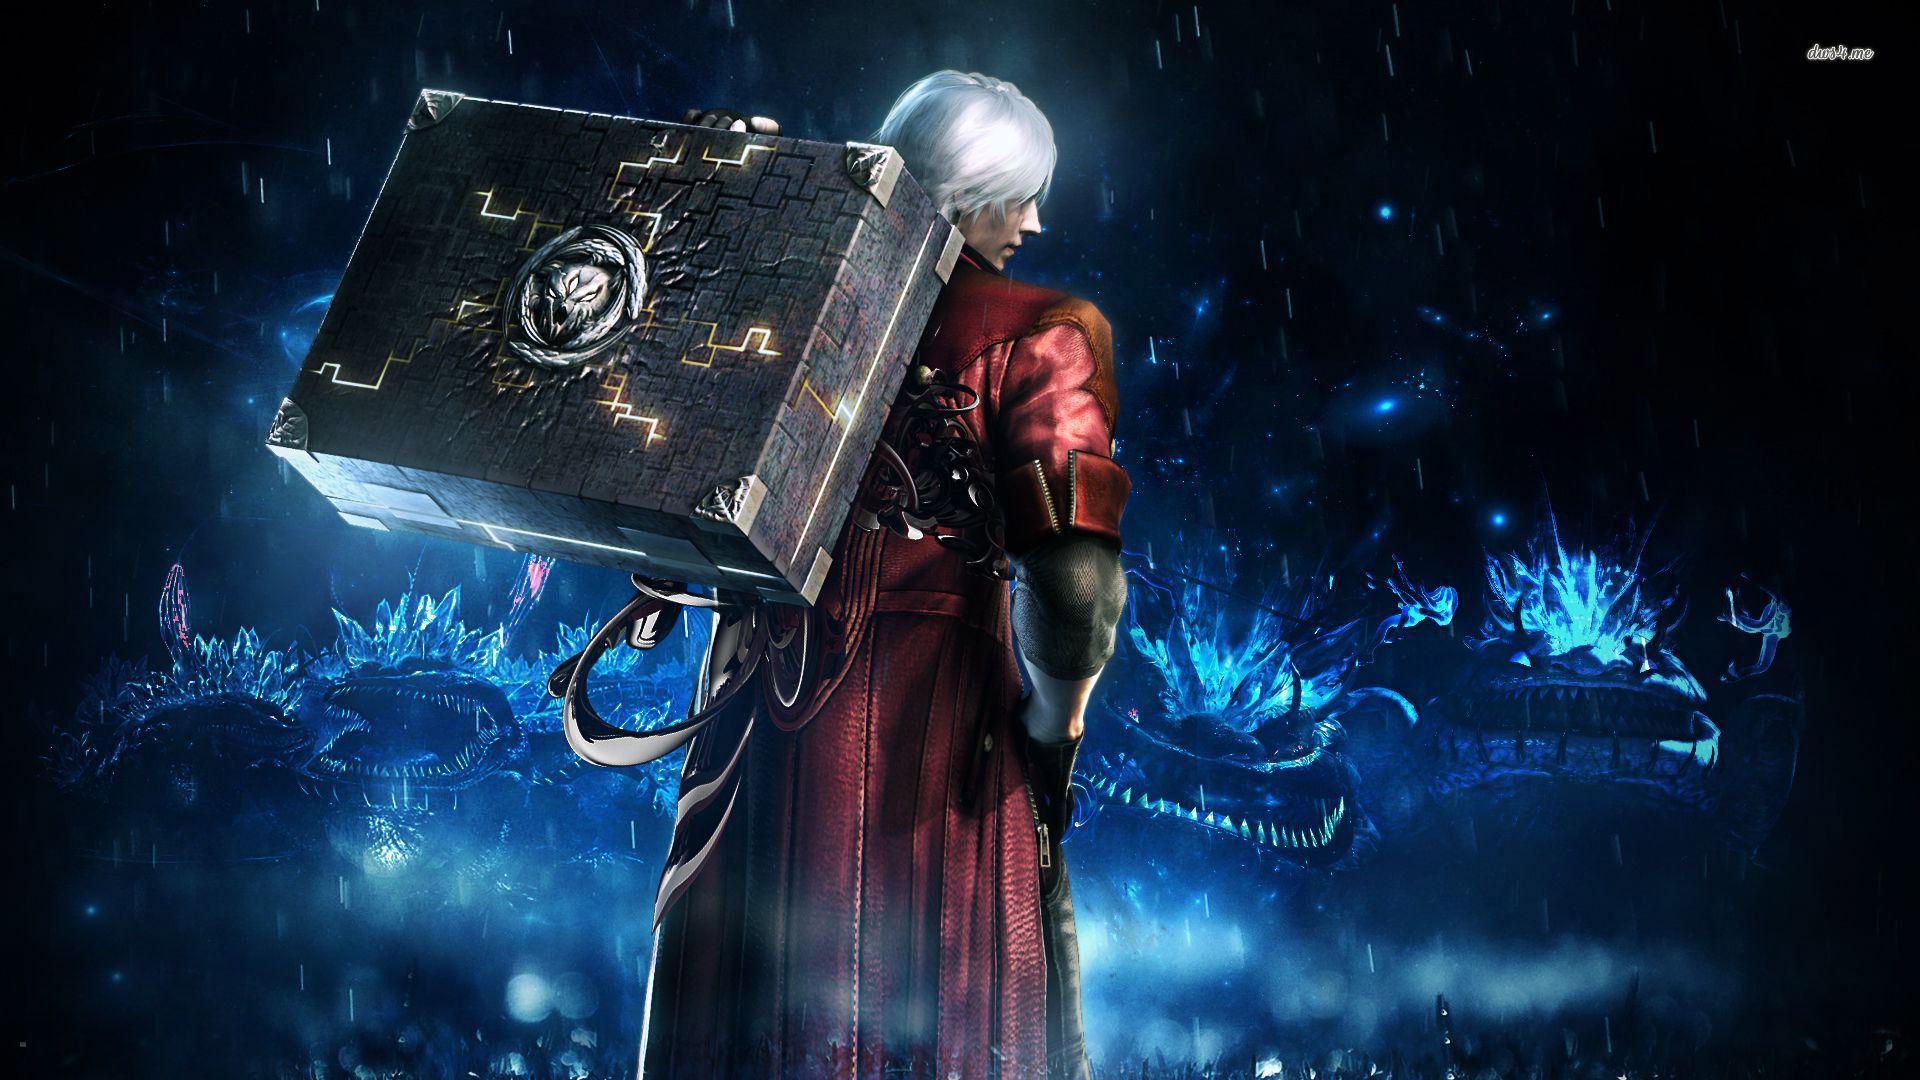 Devil May Cry 4 wallpaper - Game wallpapers - #23680